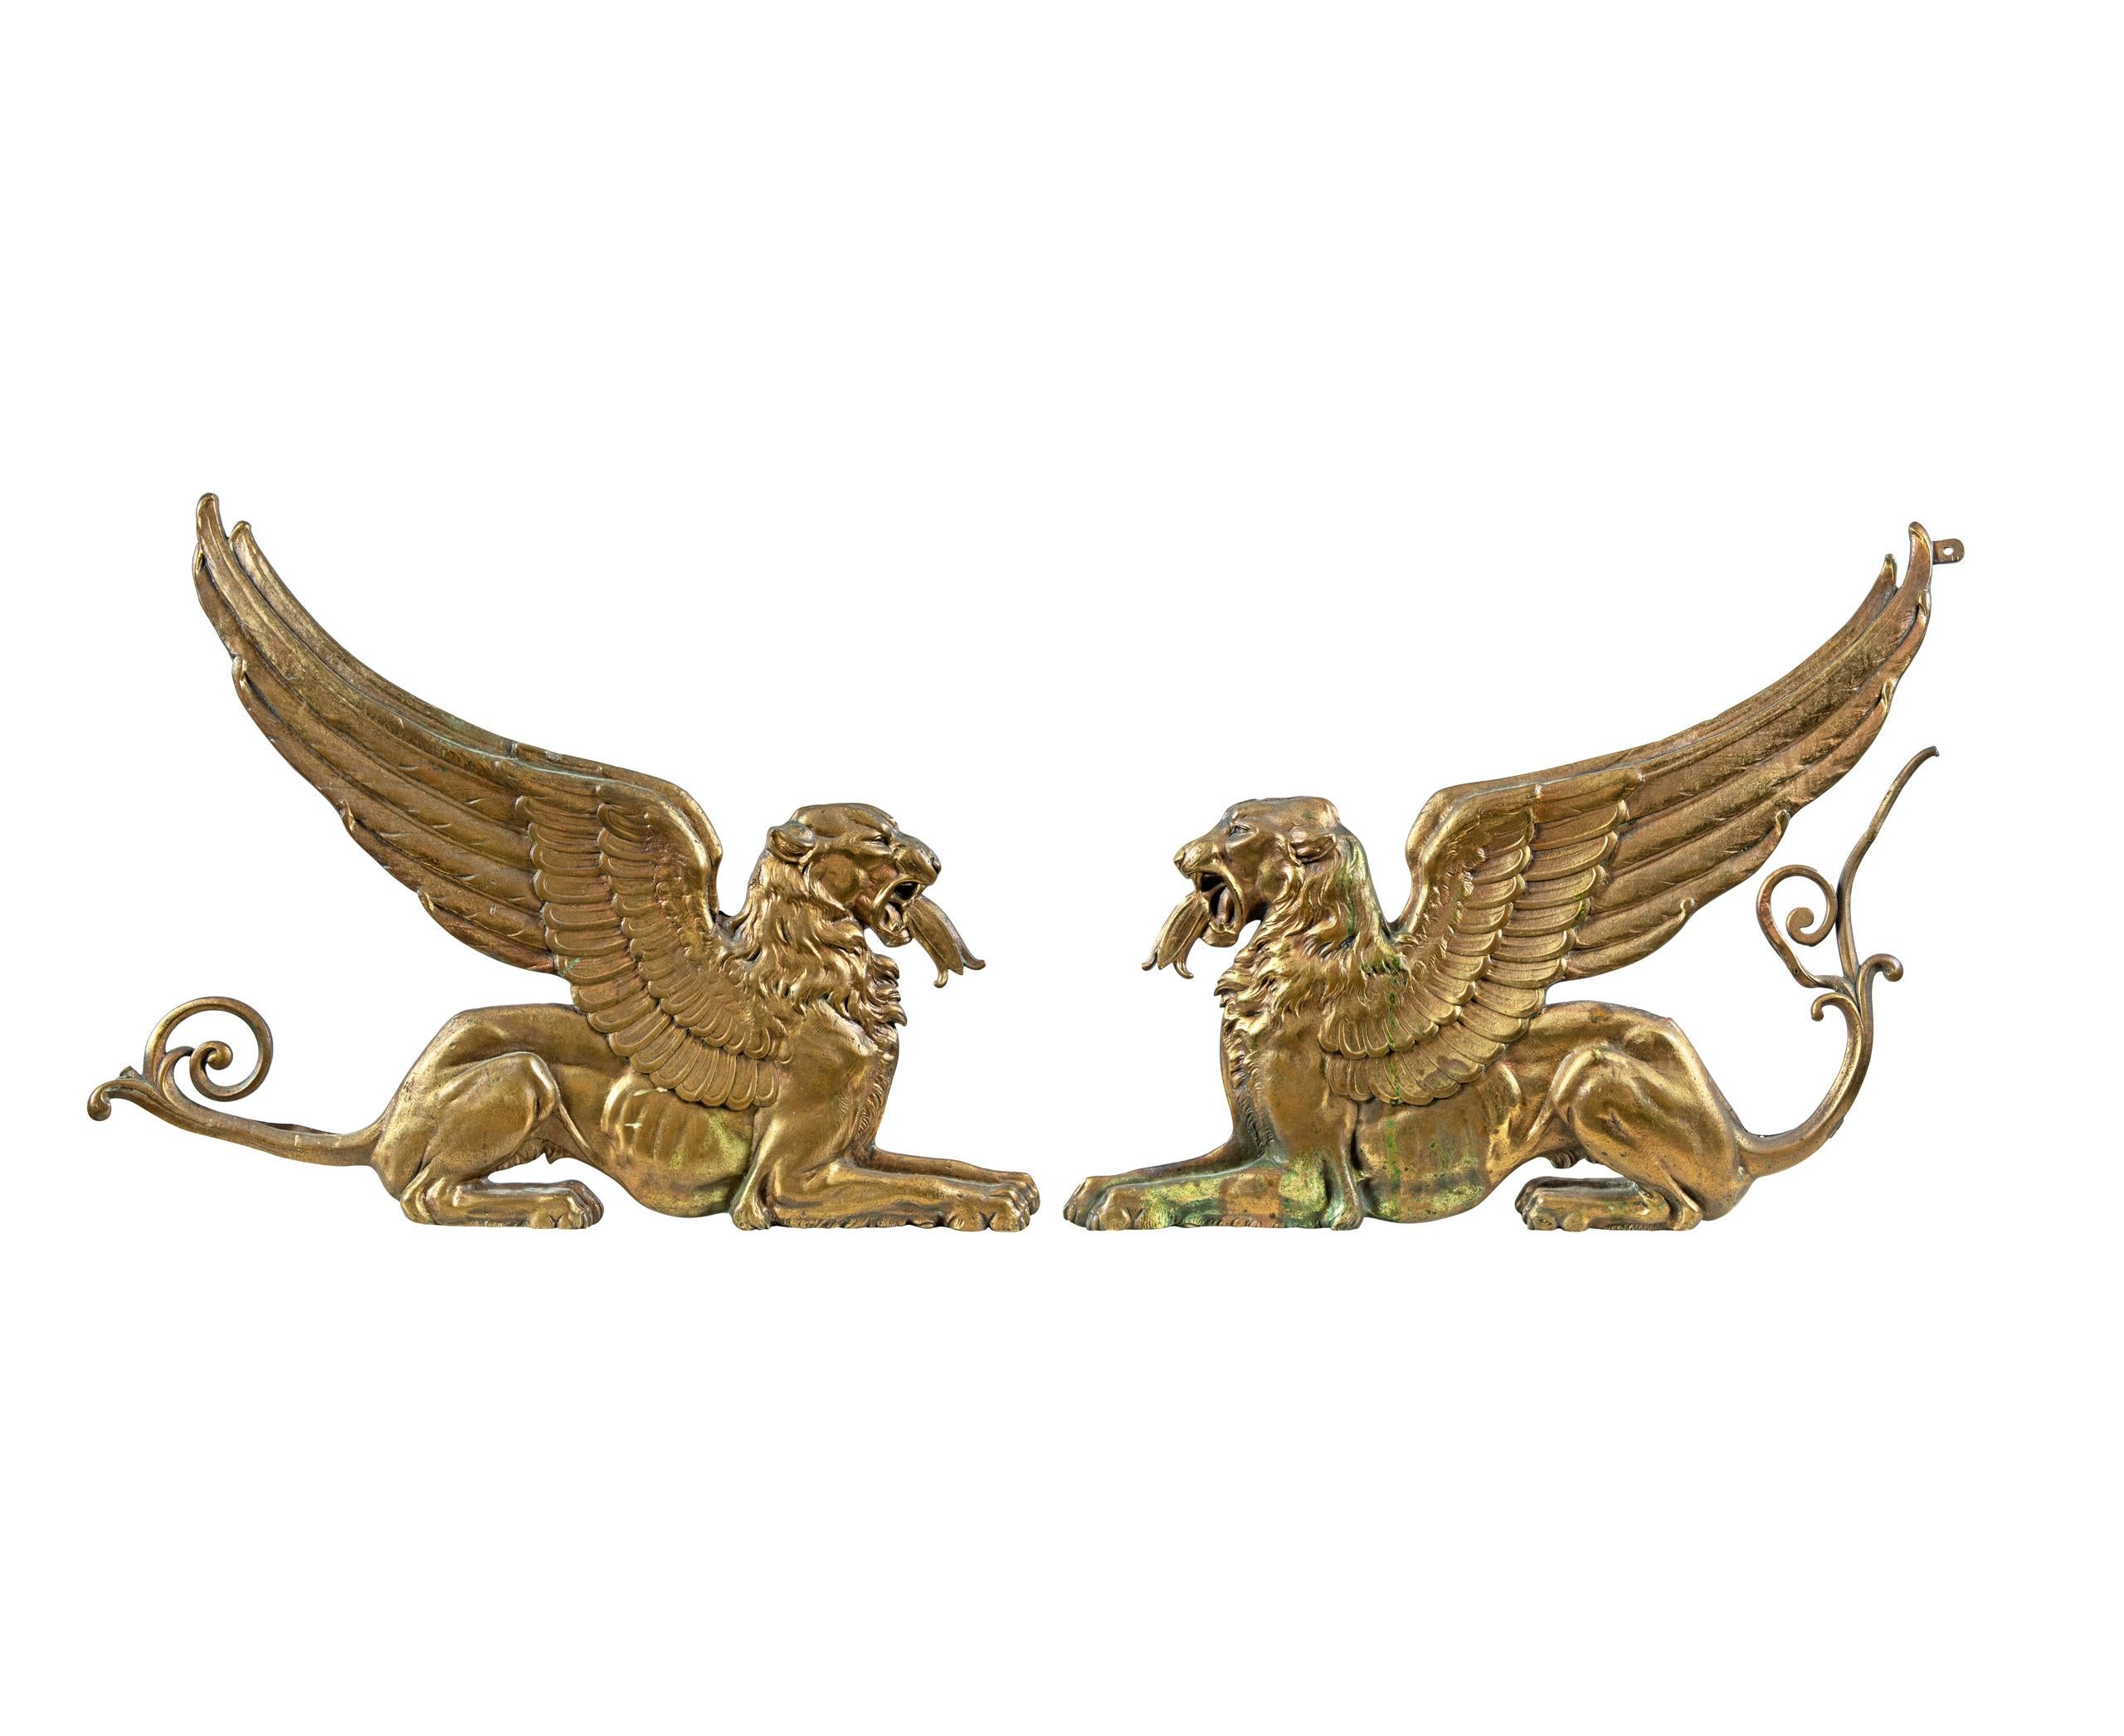 Pair of 18th-19th century Andirons Sculptures - Winged lions -  bronze Italy